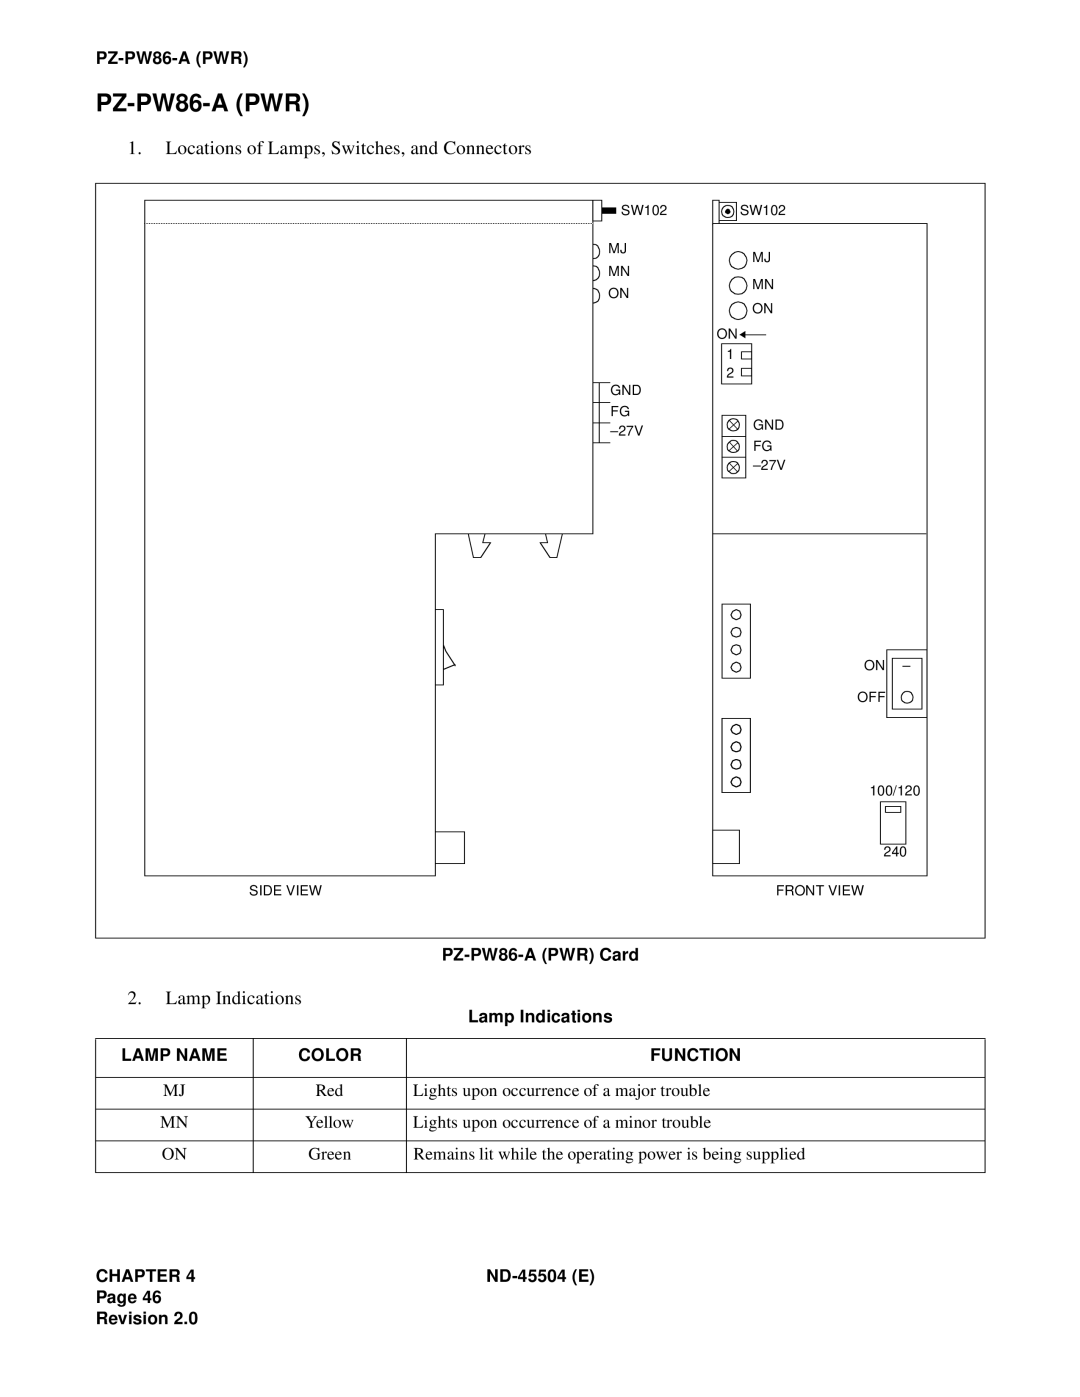 NEC 2000 IVS manual Locations of Lamps, Switches, and Connectors, Lamp Indications, PZ-PW86-APWR Card, Lamp Name, Color 